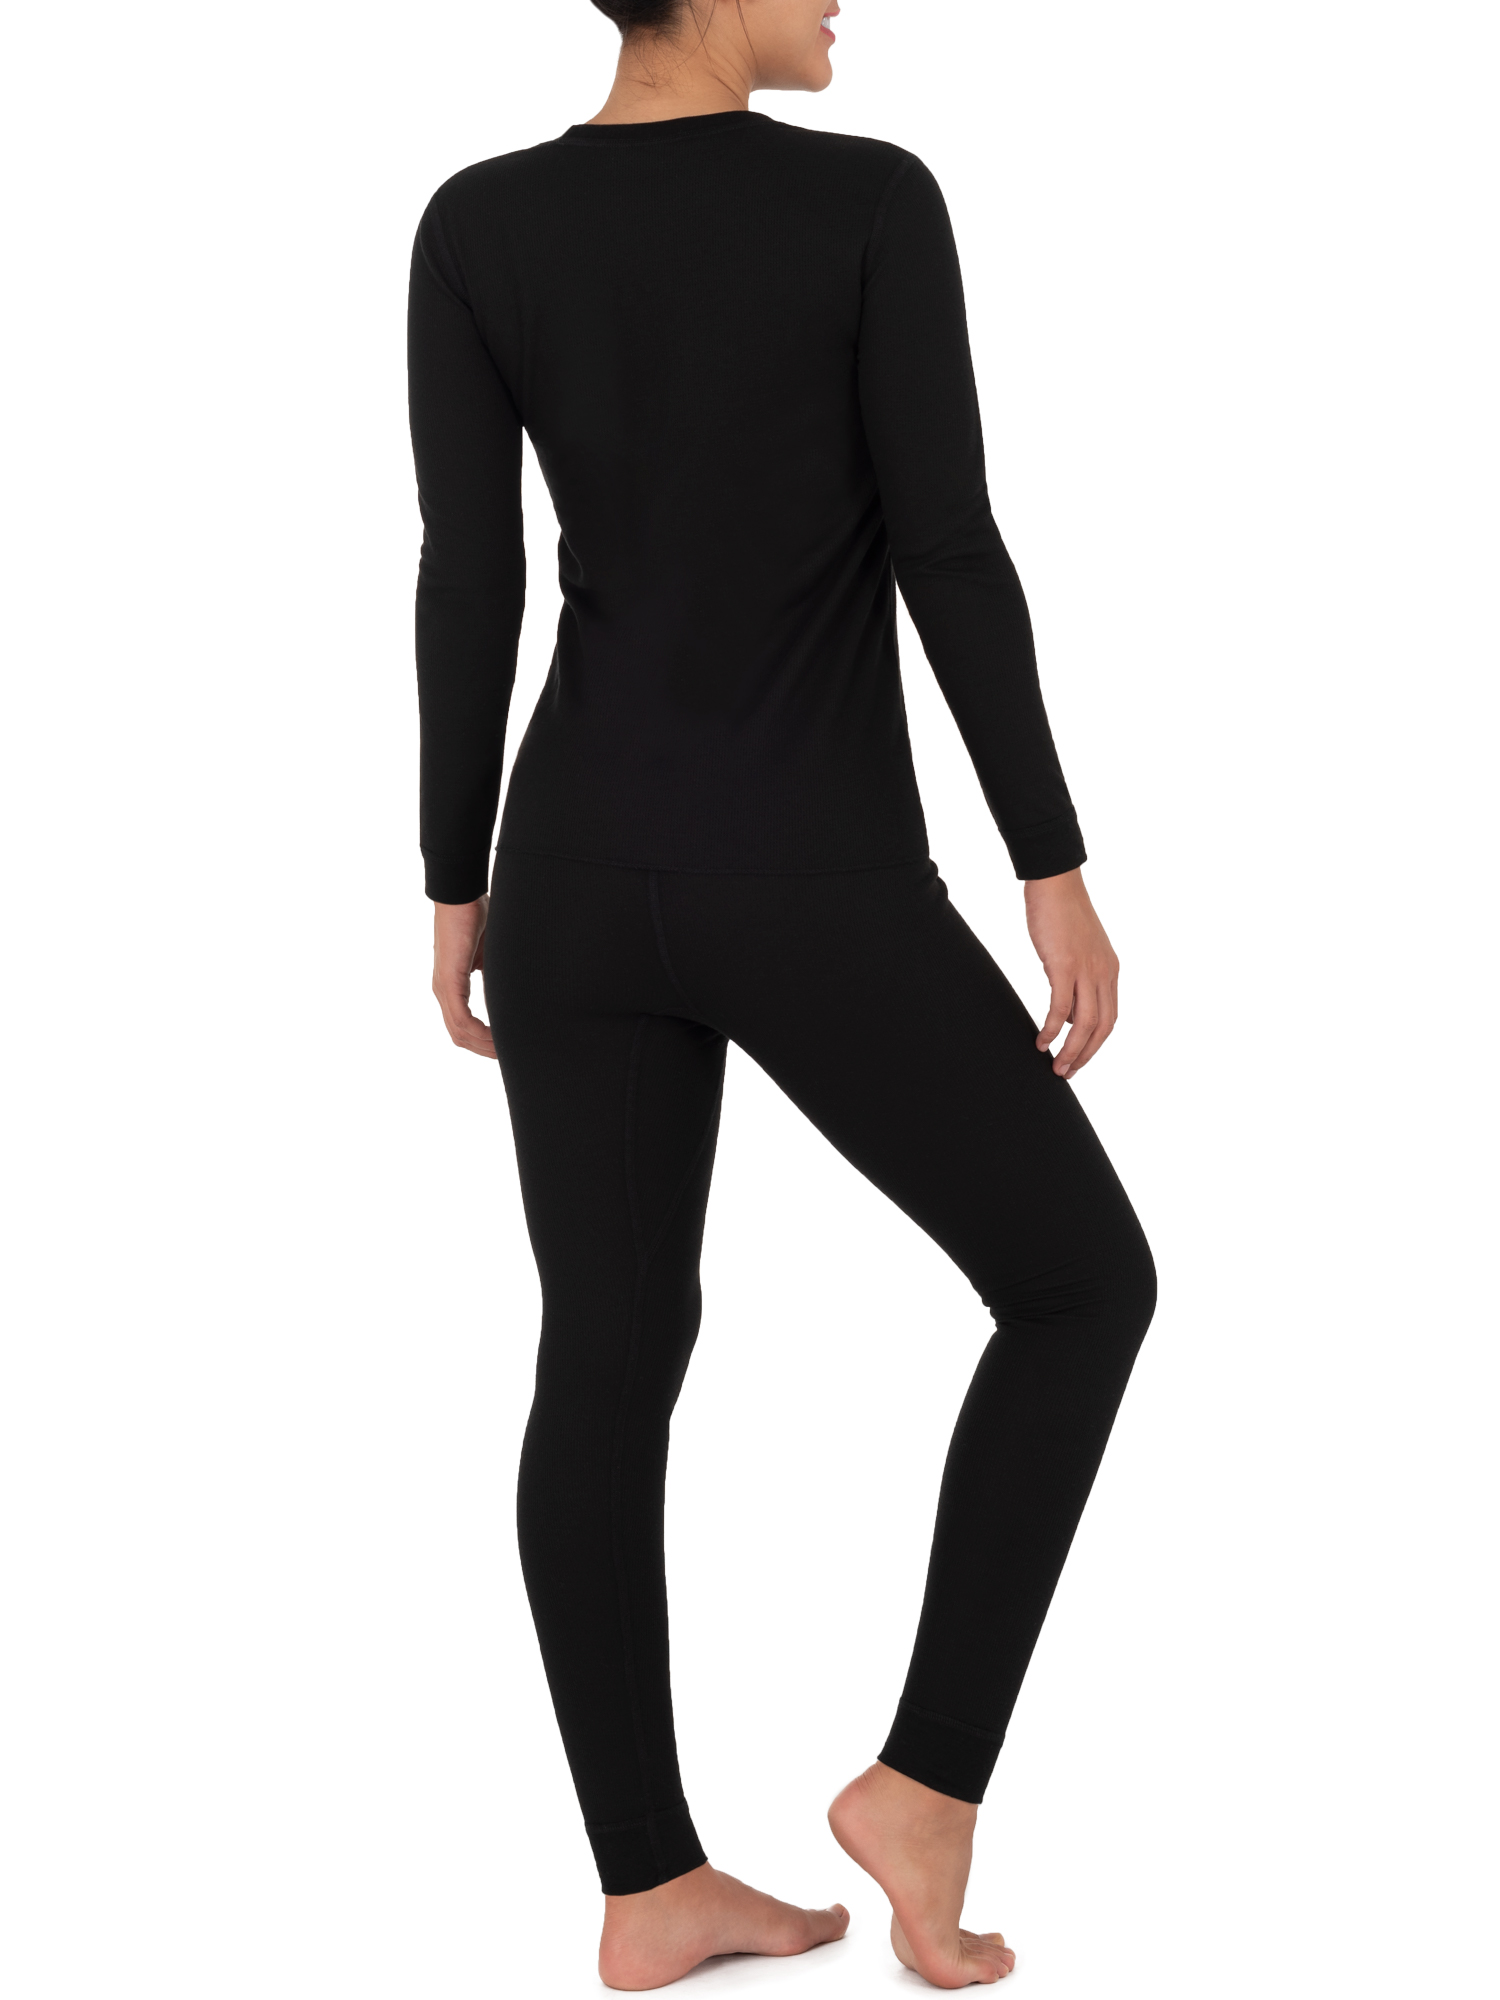 Fruit of the Loom Women's and Women's Plus Long Underwear Thermal Waffle Top and Bottom Set - image 3 of 14